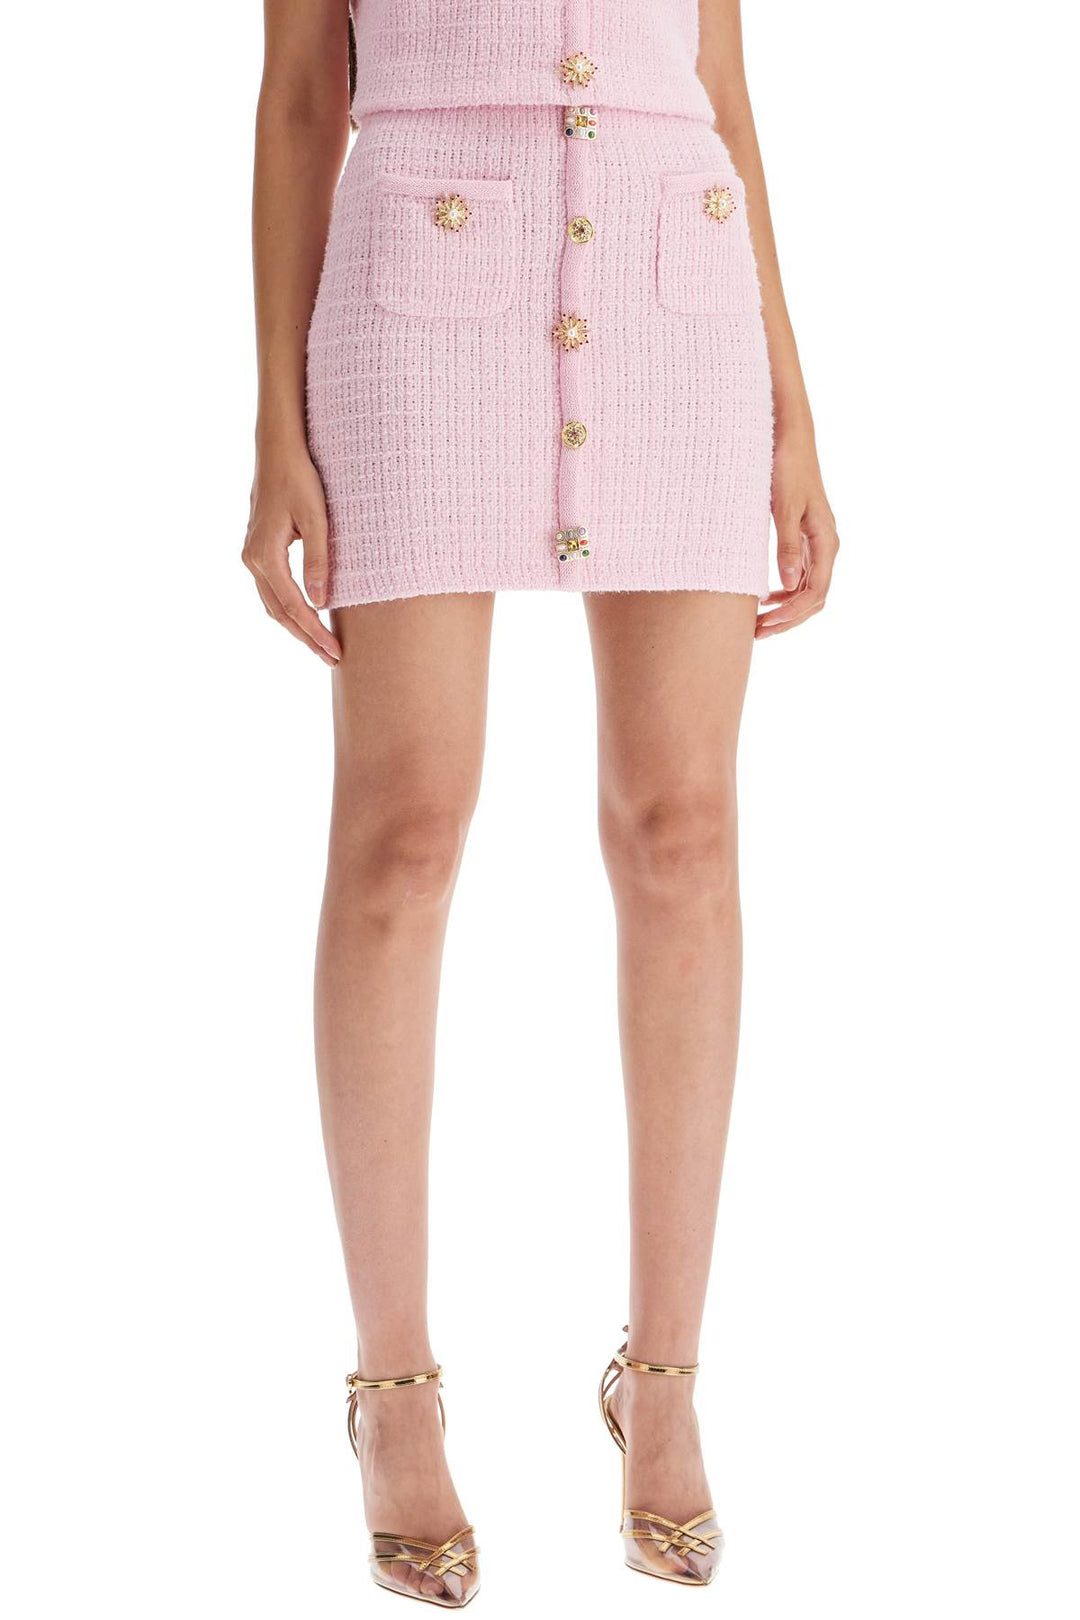 Self Portrait Knitted Mini Skirt With Jewel Buttons   Pink